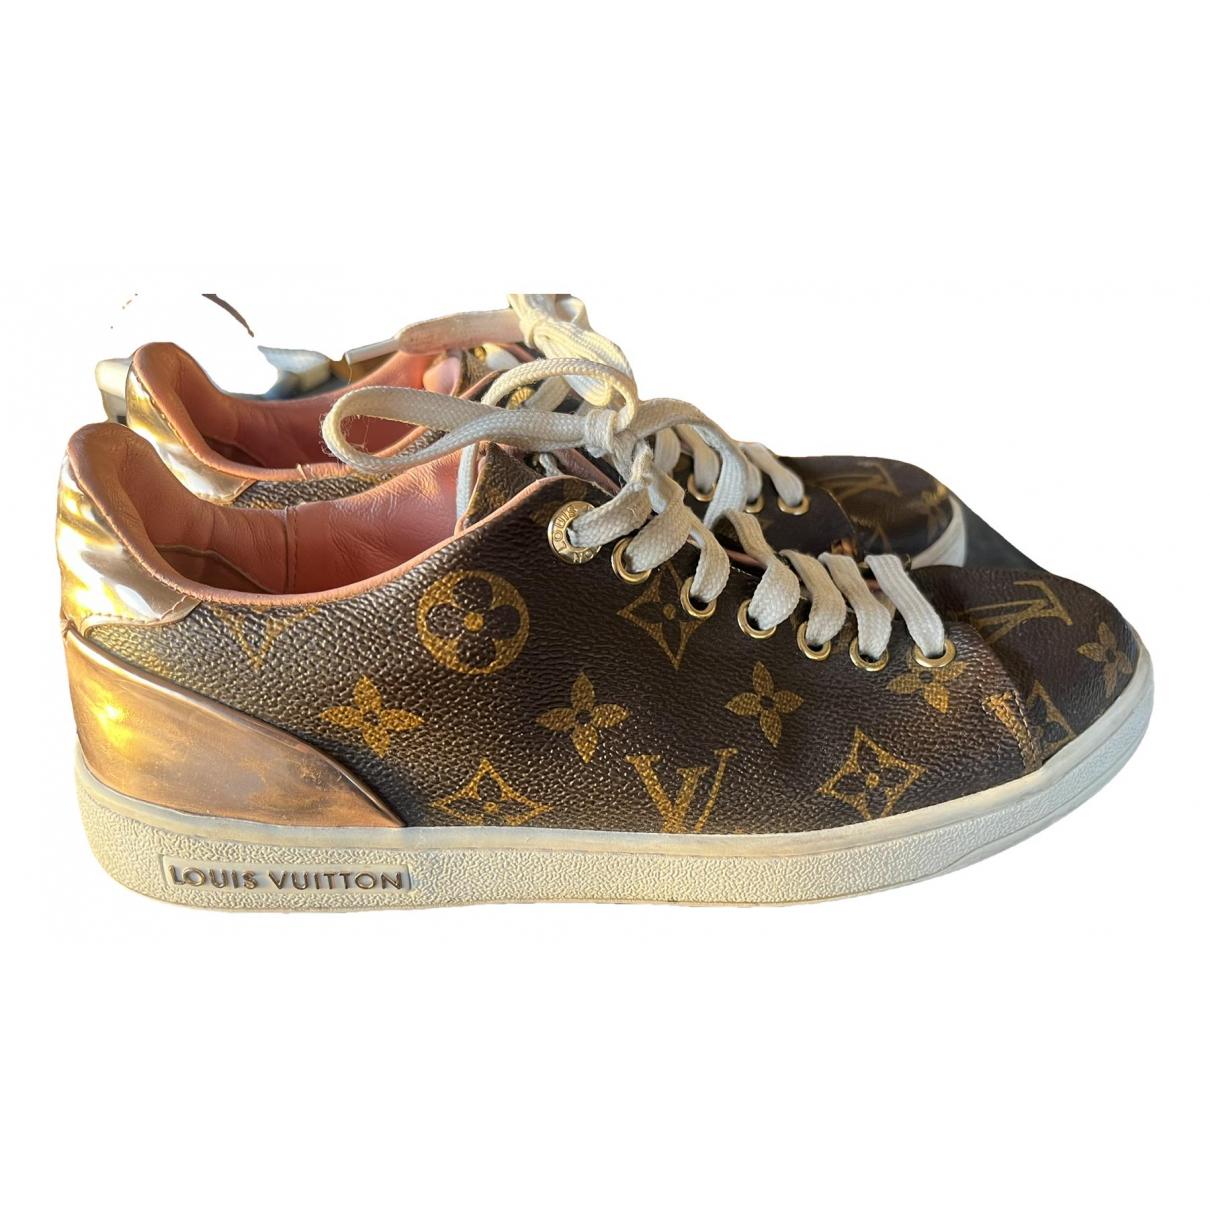 Sneaker Frontrow Louis Vuitton Top Sellers, SAVE 45